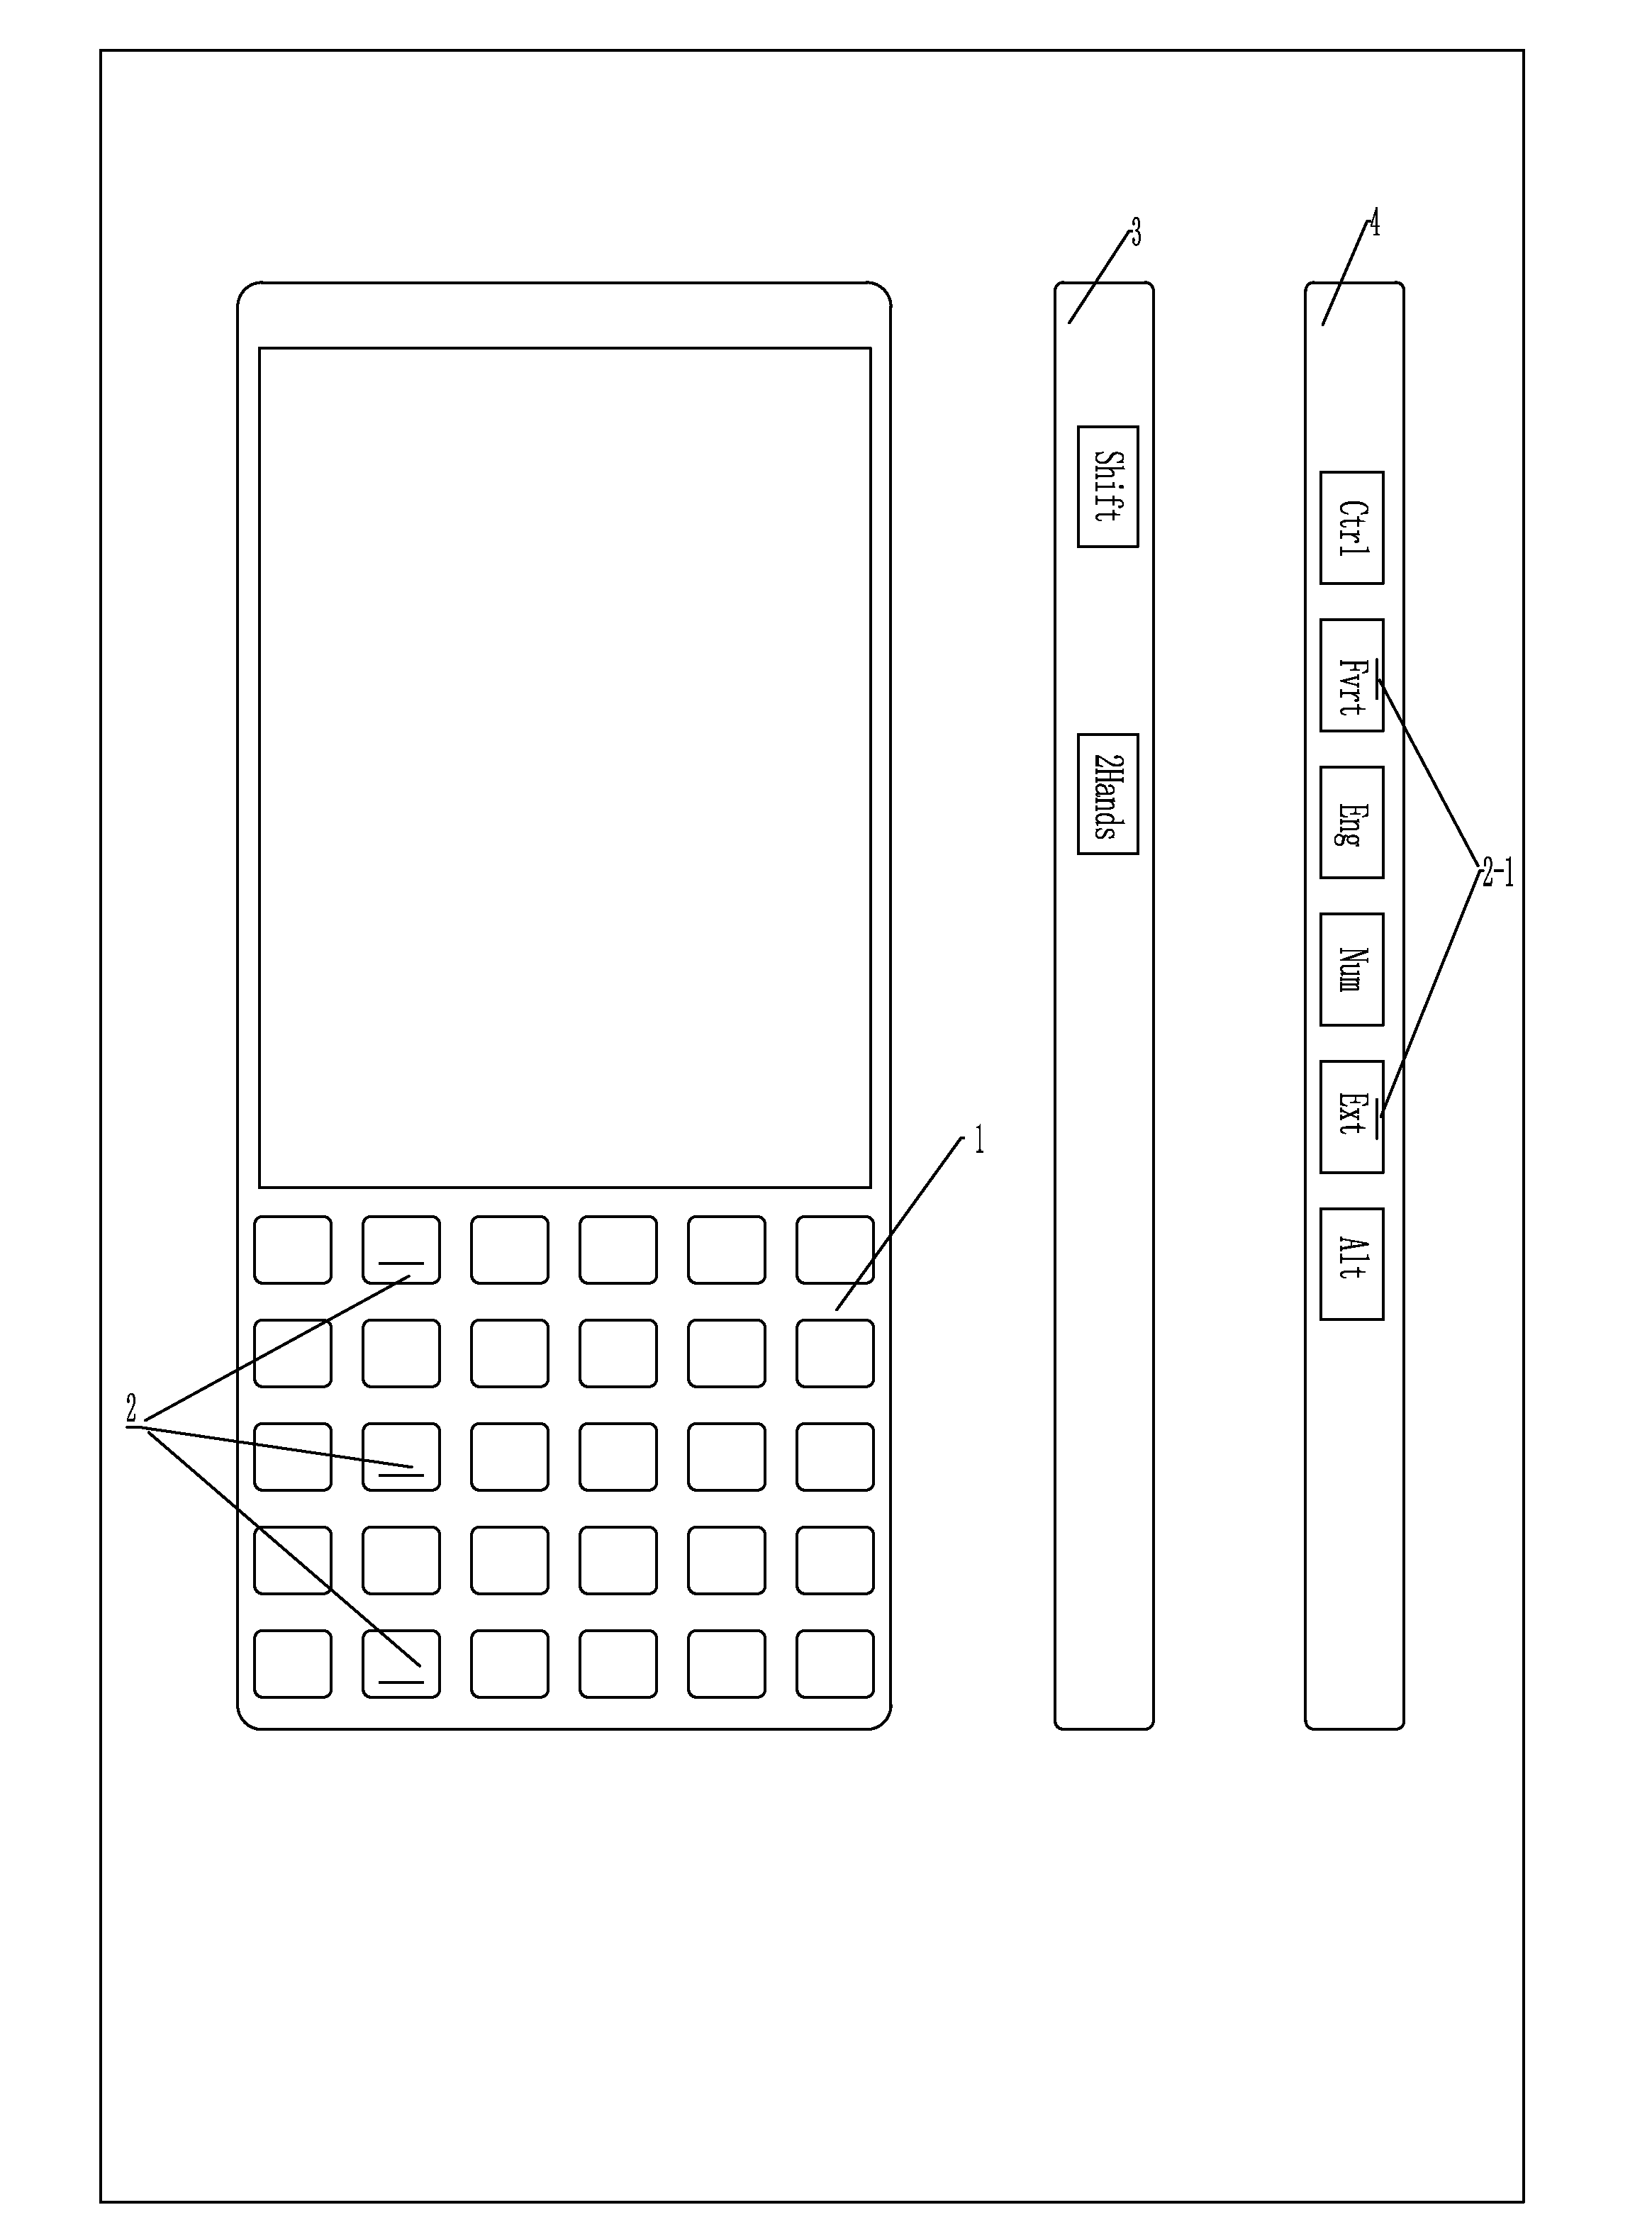 Keyboard and Mouse of Handheld Digital Device